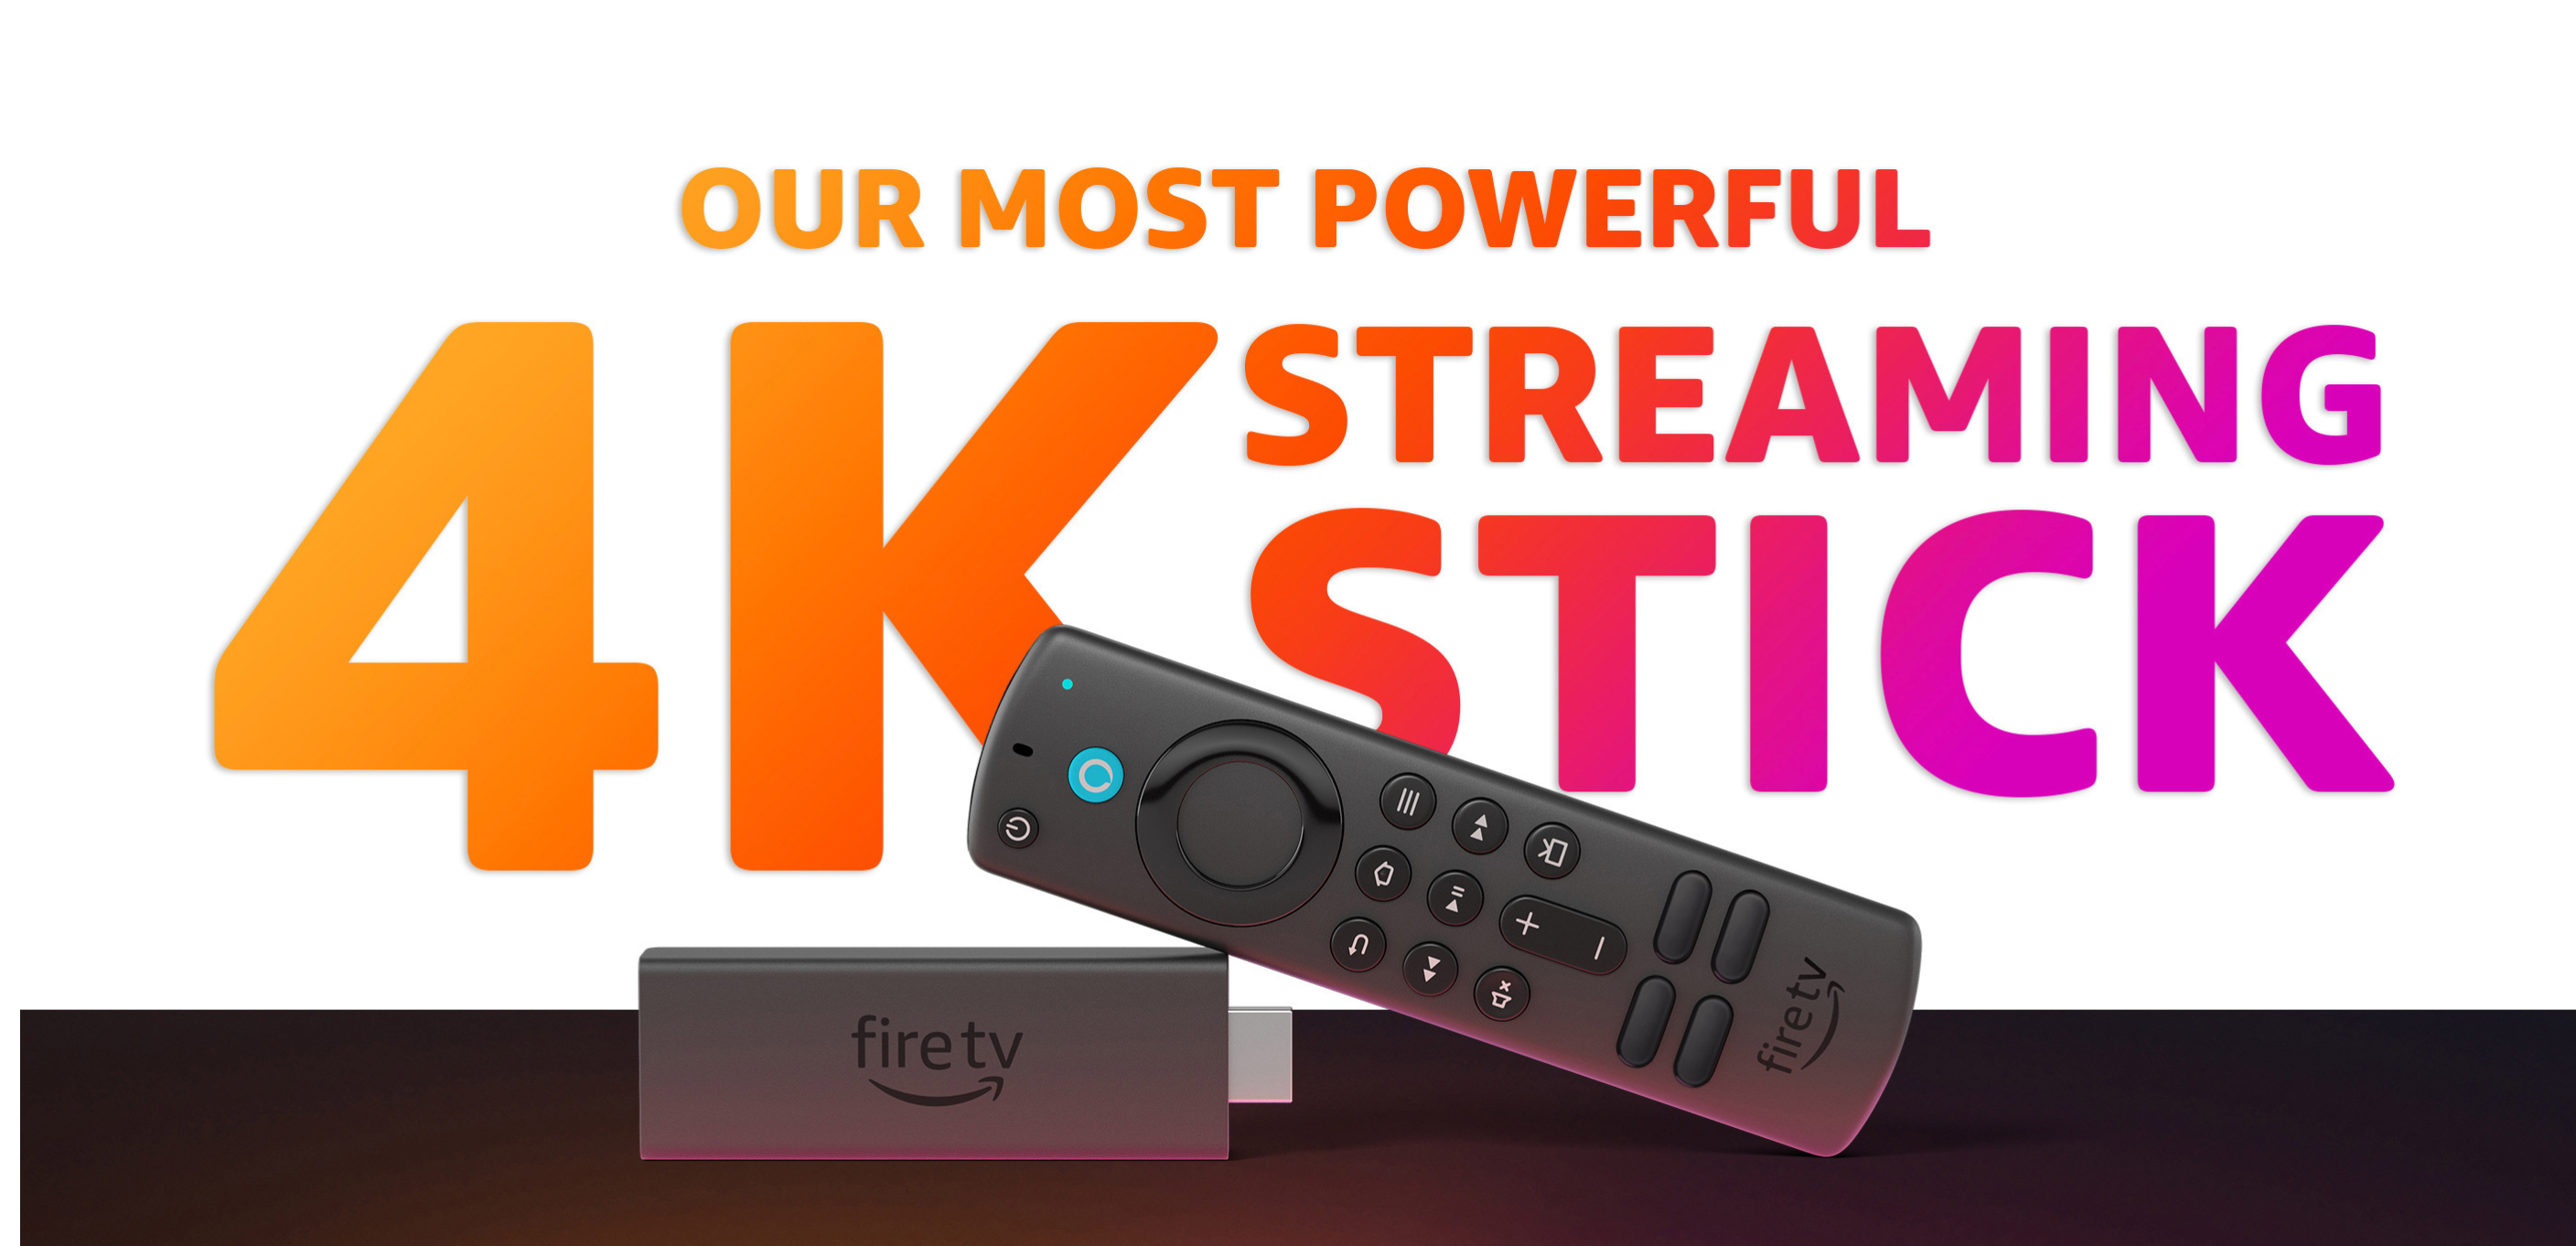 Fire TV Stick 4K Max gets hefty discount, dropping it to just $35